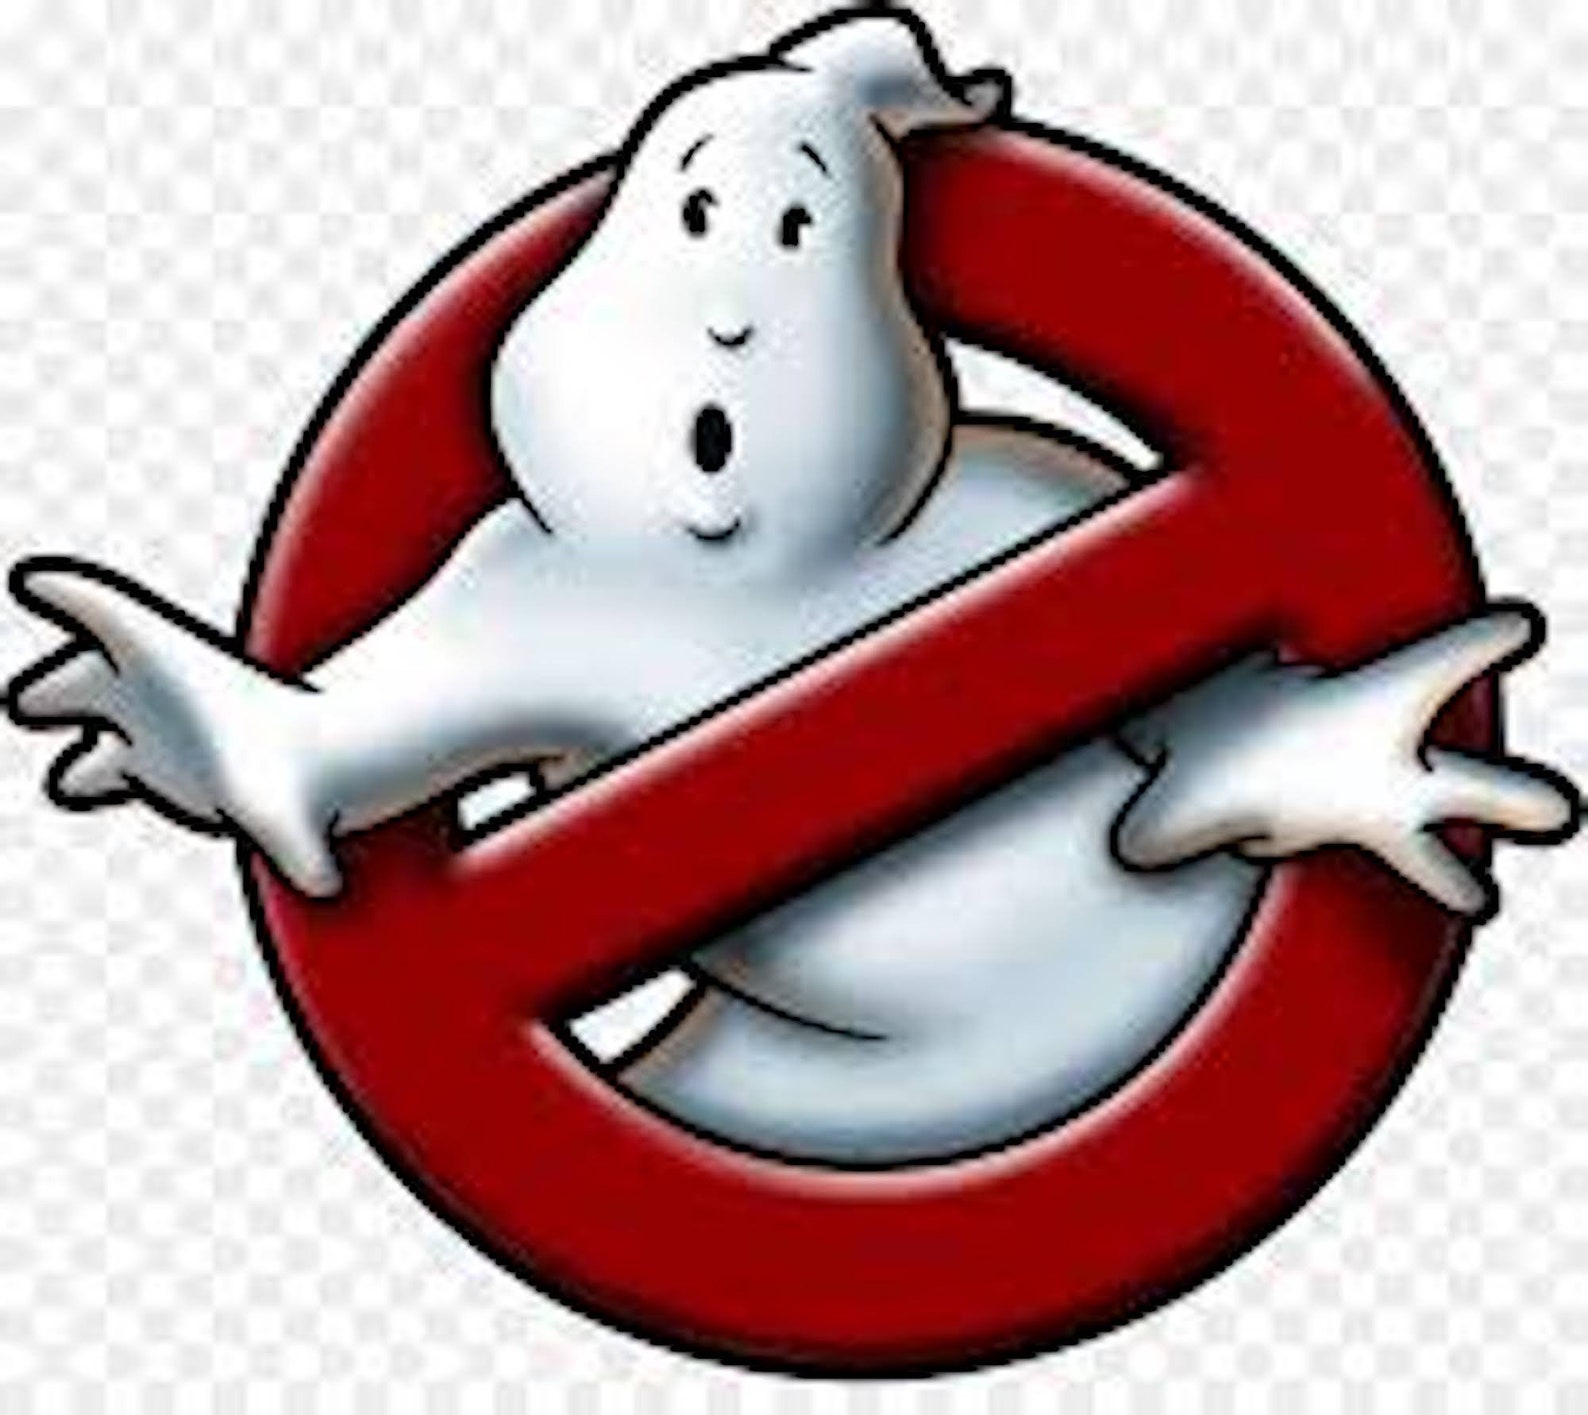 ghostbusters logo ghost name